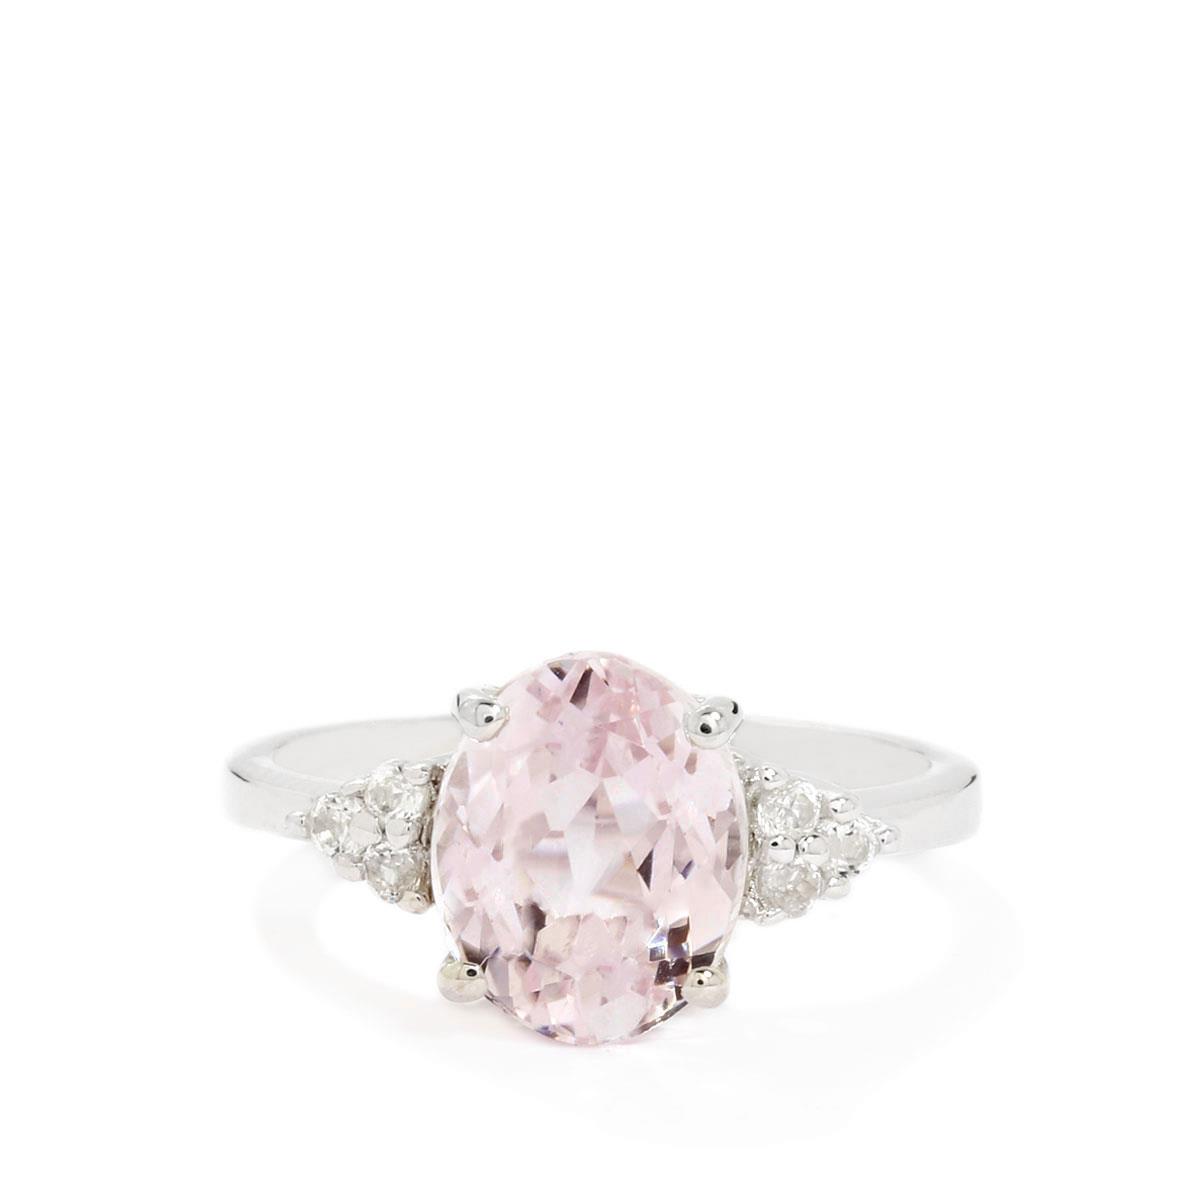 Ice Kunzite & White Topaz Sterling Silver Ring ATGW 3.48cts | Gemporia